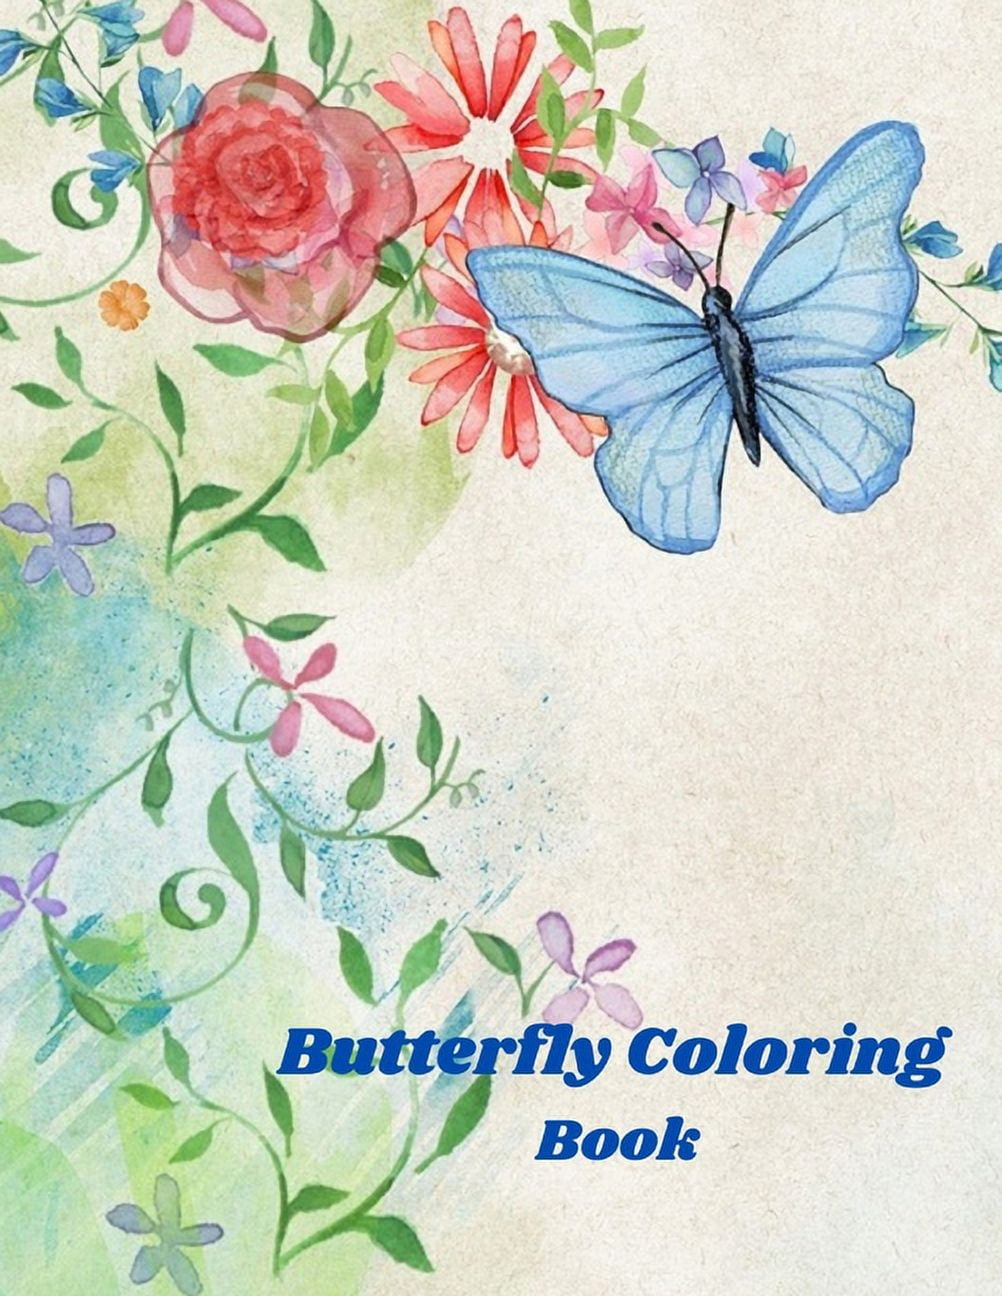 Coloring Books for Seniors: Swirl Designs: Butterflies, Flowers, Paisleys,  Swirls & Geometric Patterns; Stress Relieving Coloring Pages; Art Thera  (Paperback)